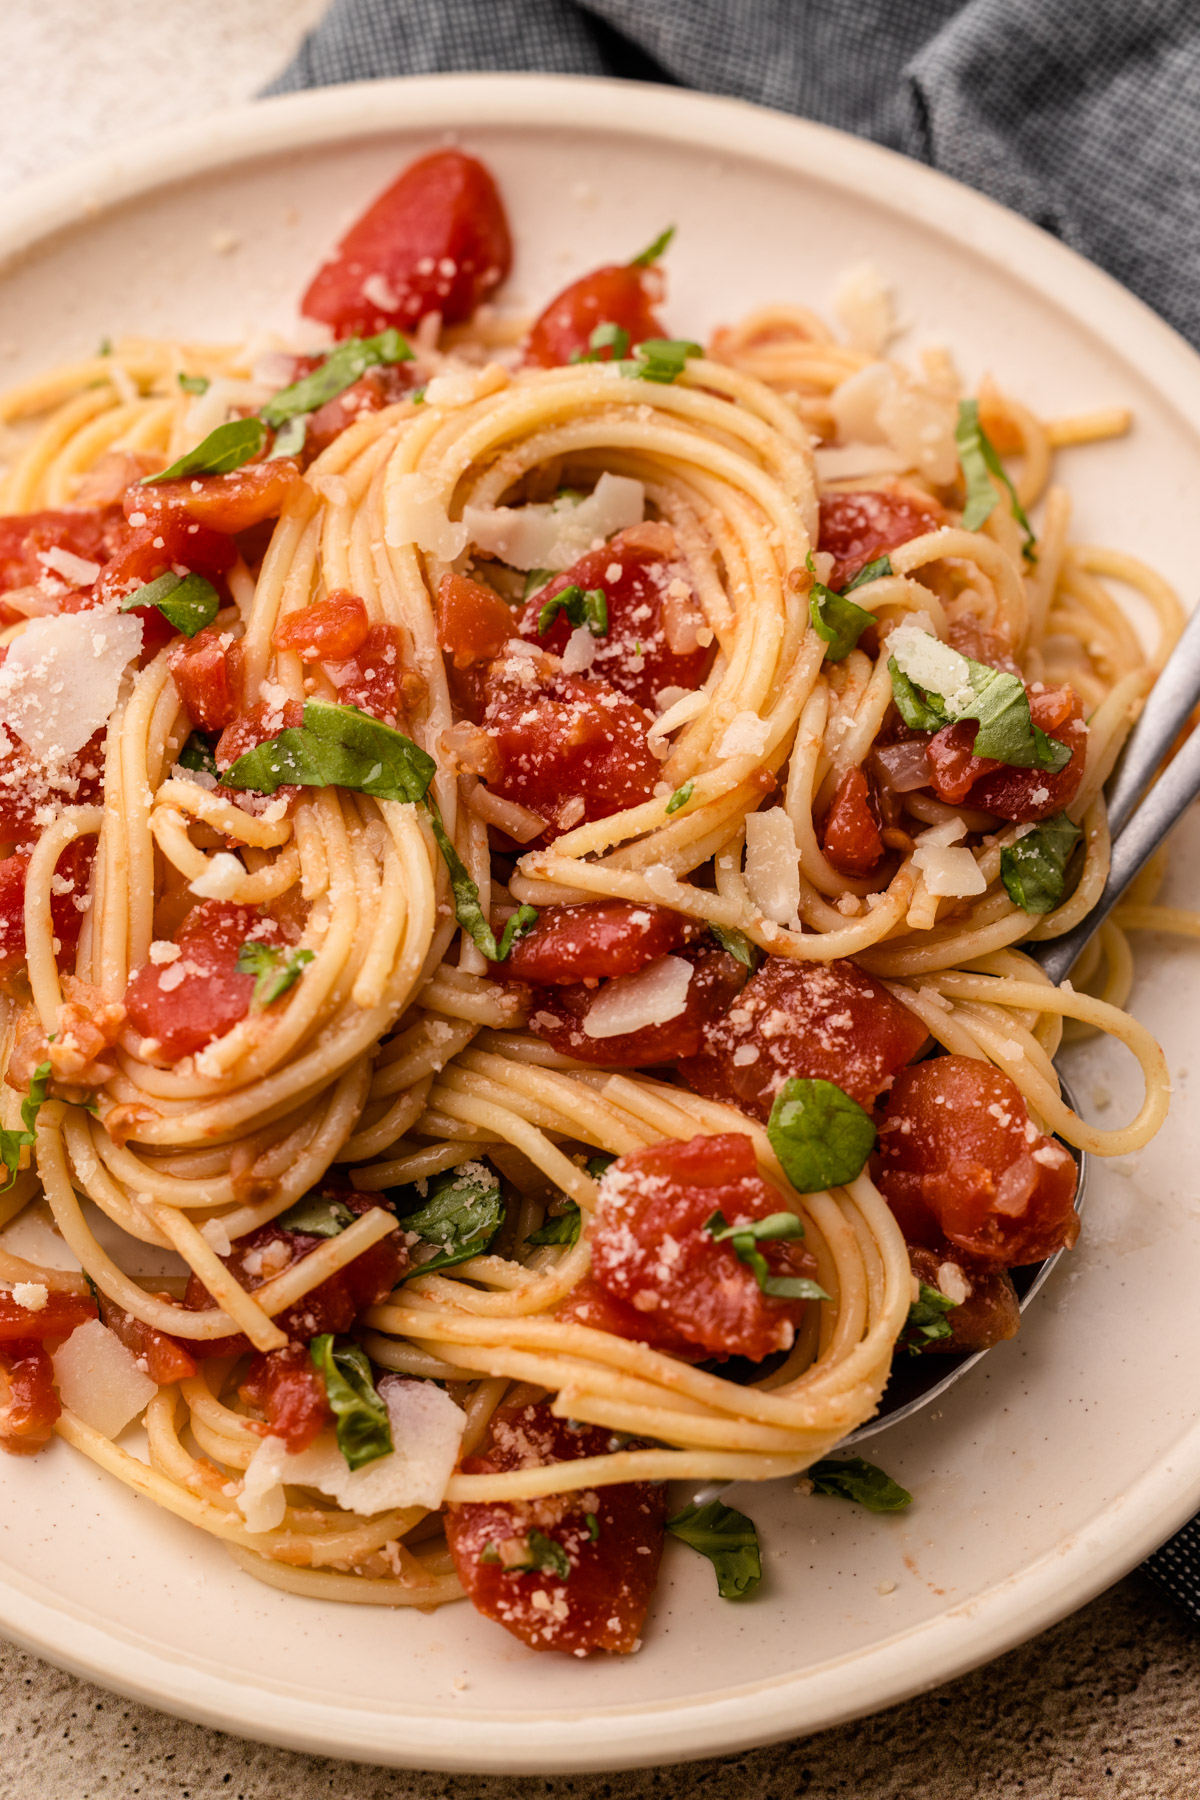 A plate of tomato basil pasta.